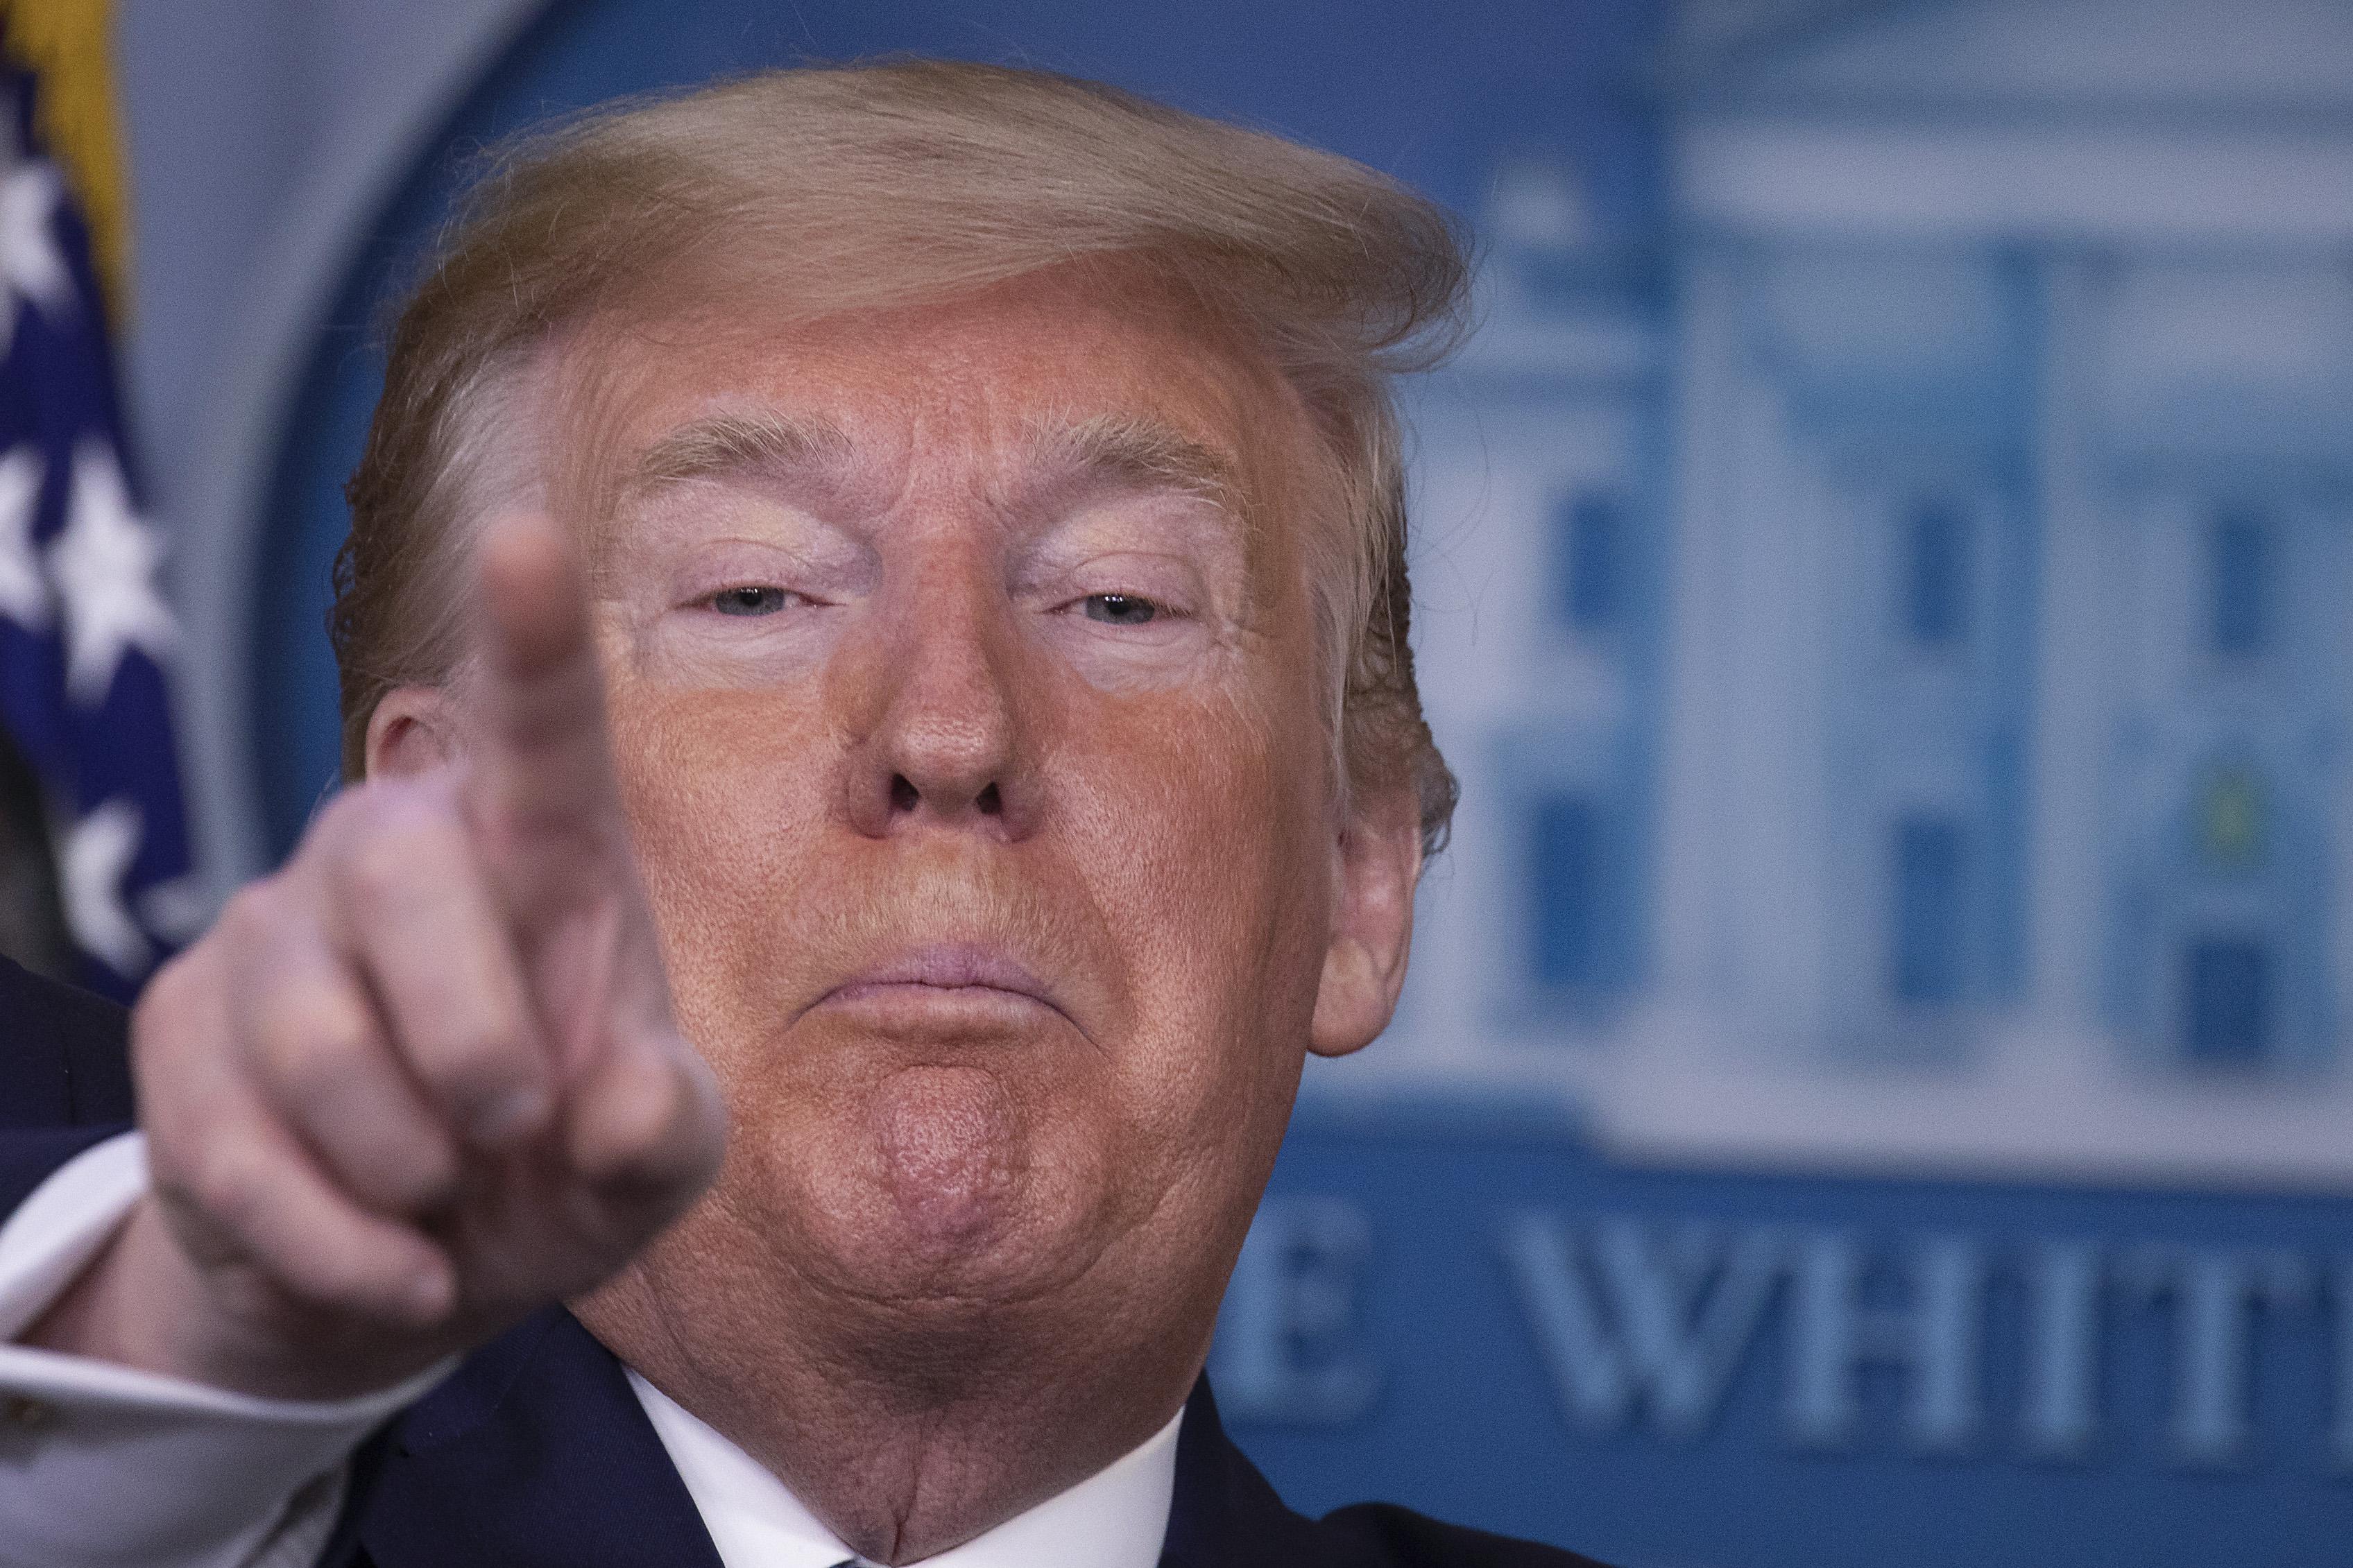 President Donald Trump takes questions during a briefing in the James Brady Press Briefing Room at the White House on March 21, 2020 in Washington, D.C.